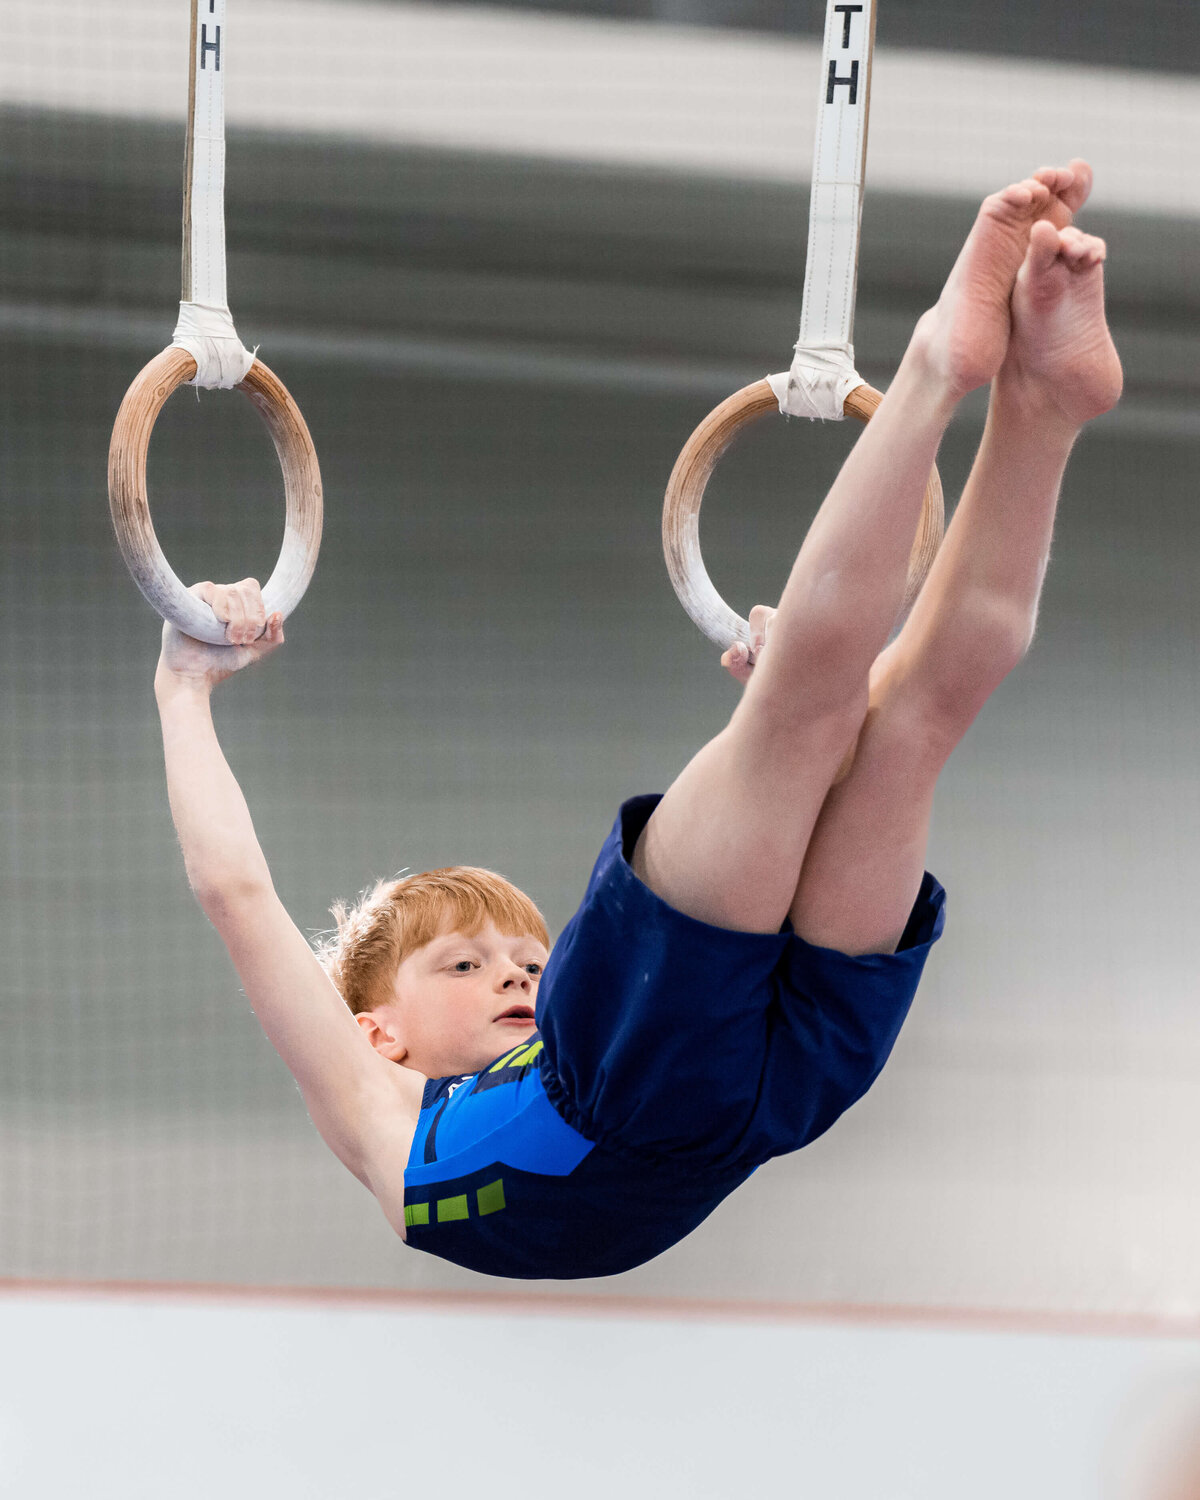 Photo by Luke O'Geil taken at the 2023 inaugural Grizzly Classic men's artistic gymnastics competitionA1_07953